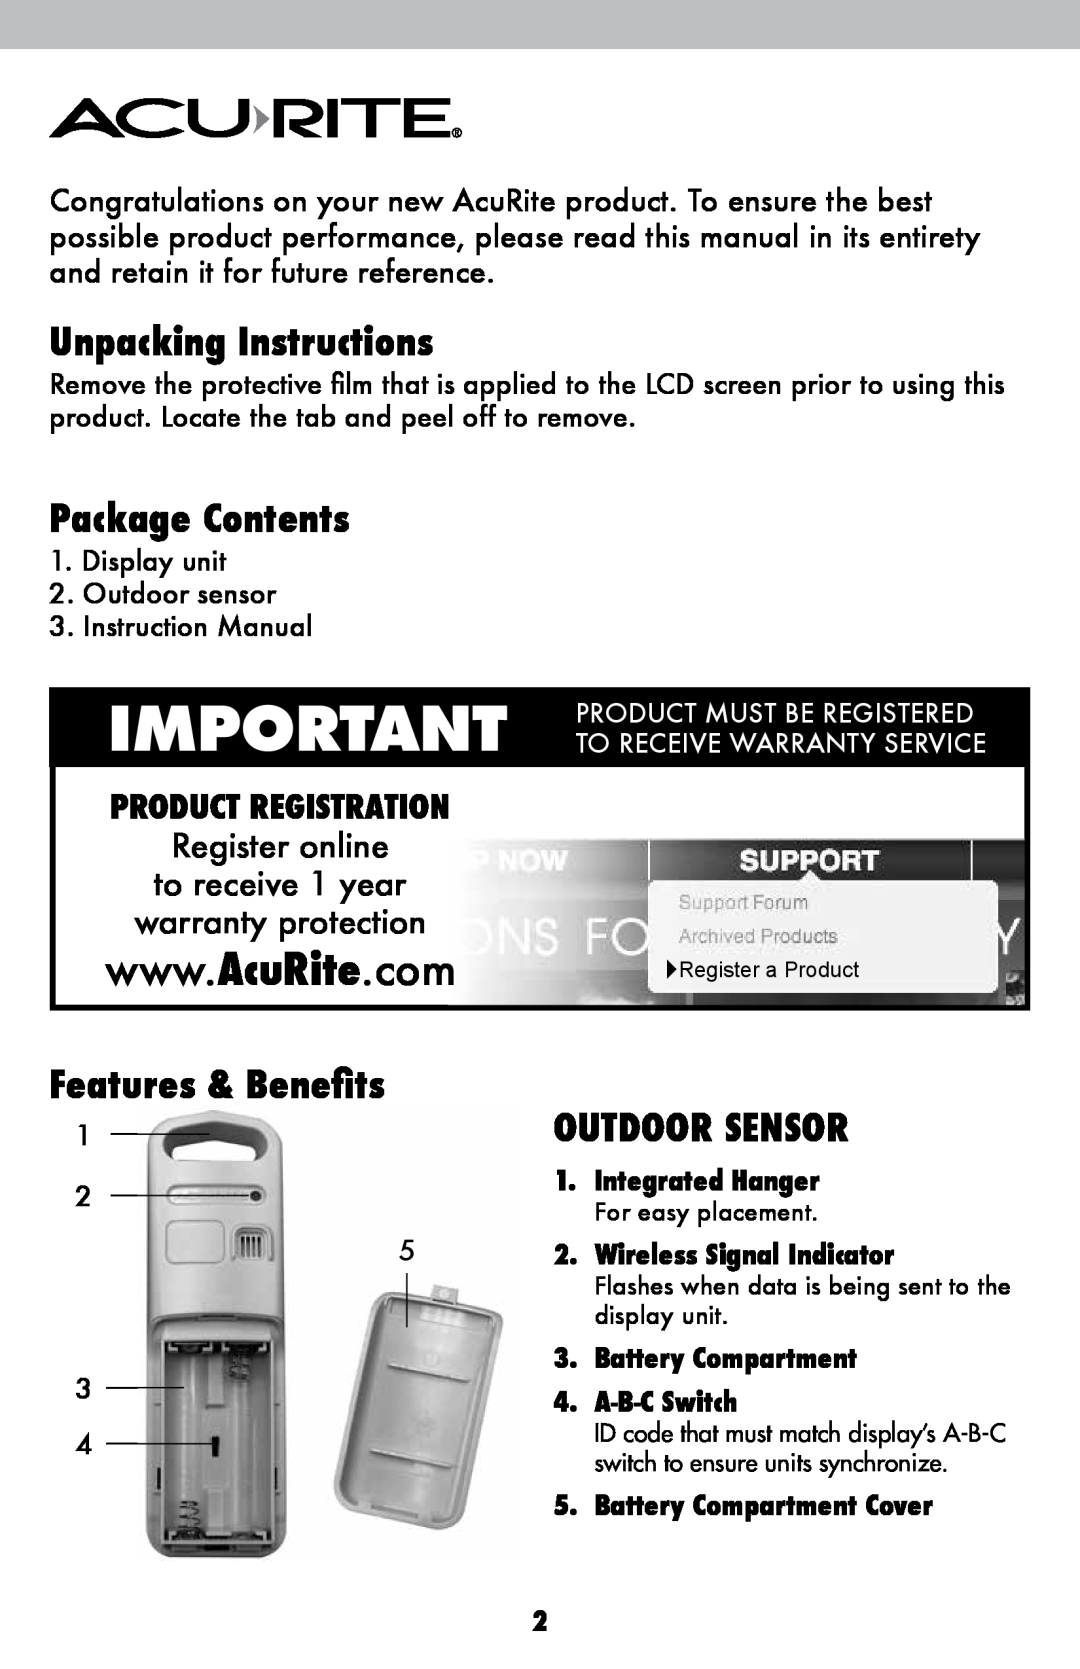 Acu-Rite 00771W Unpacking Instructions, Package Contents, Outdoor Sensor, Product Must Be Registered, Features & Benefits 